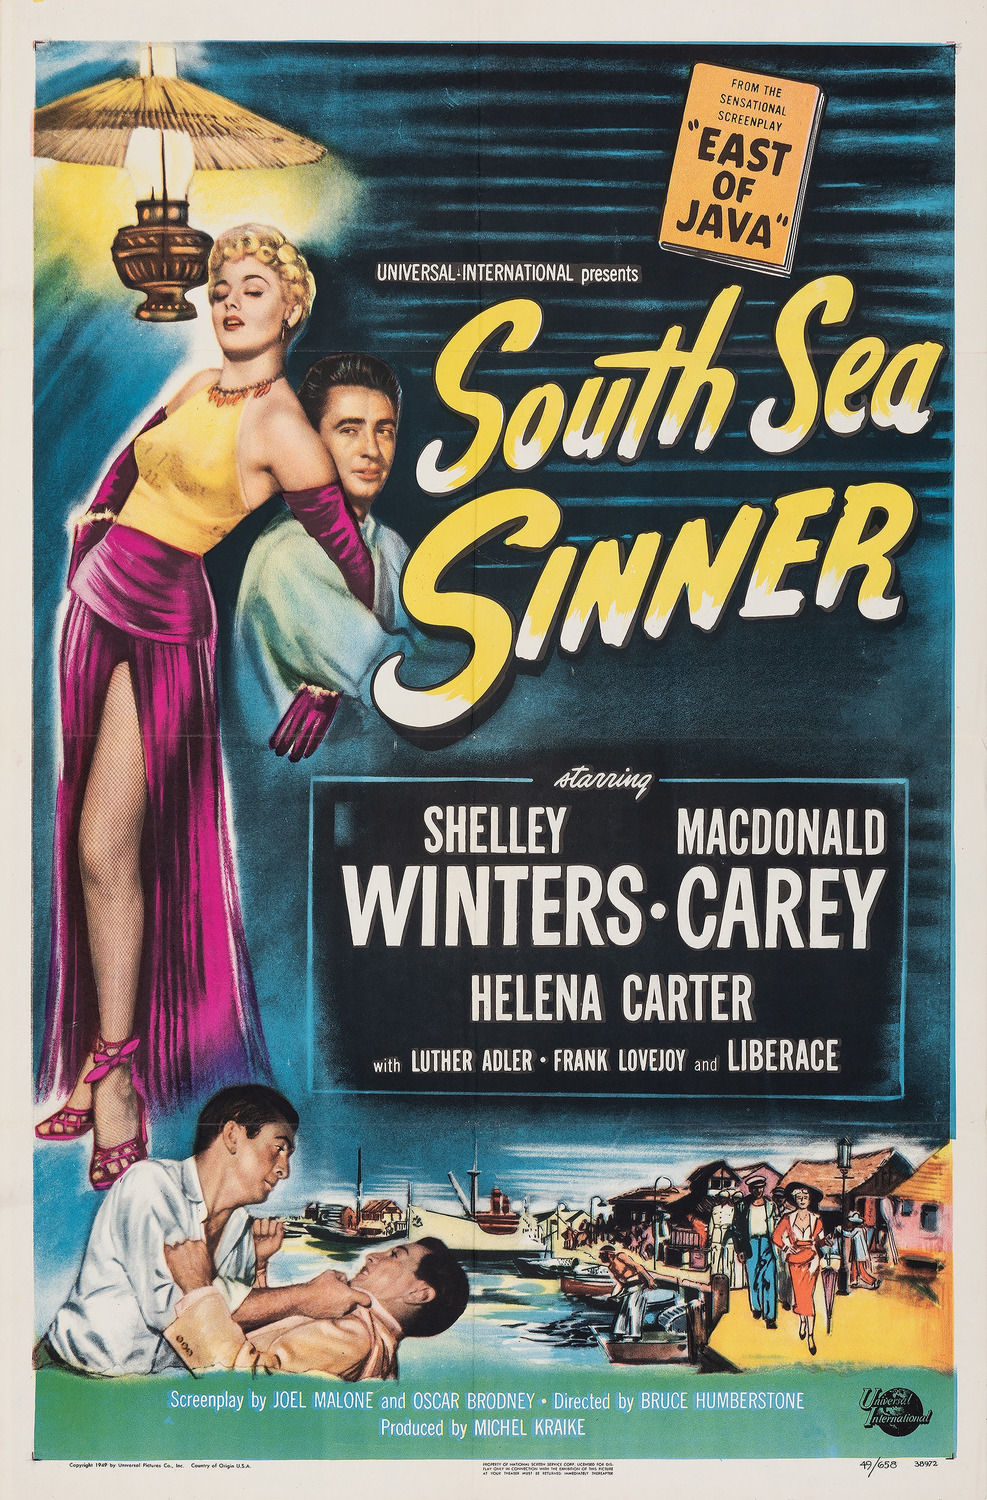 Extra Large Movie Poster Image for South Sea Sinner (#1 of 2)